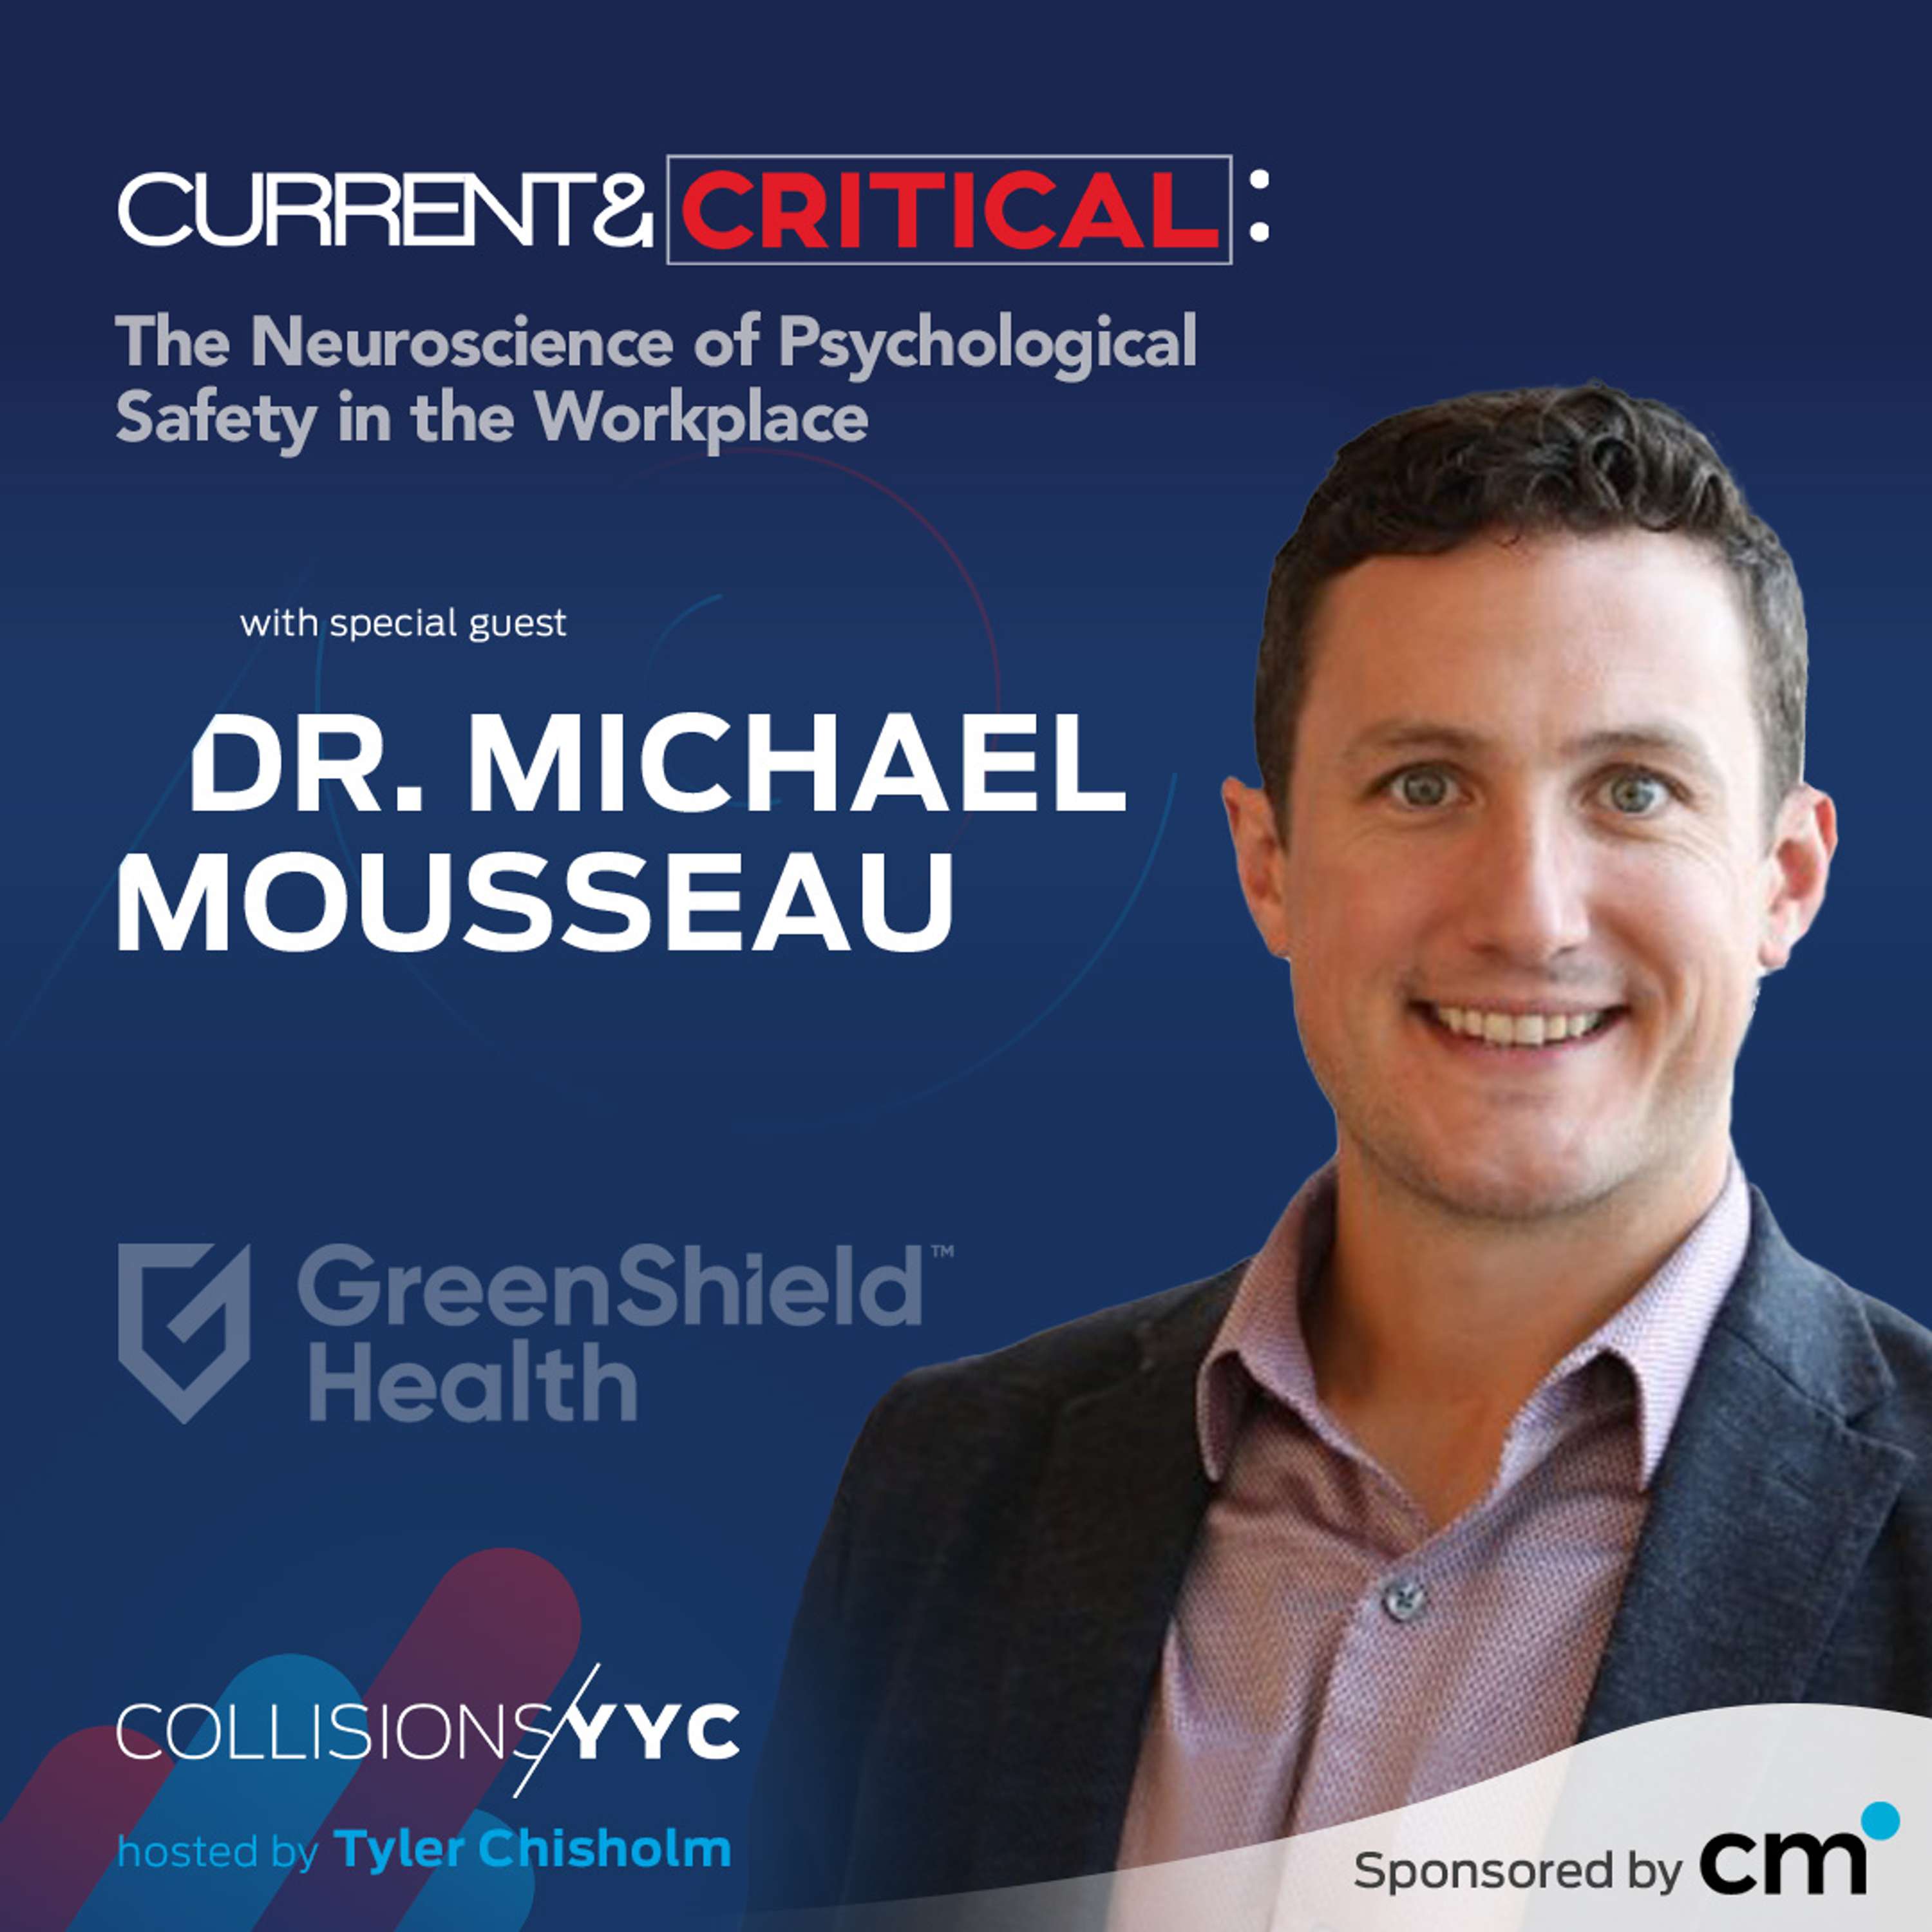 Dr. Michael Mousseau, The Neuroscience of Psychological Safety in the Workplace